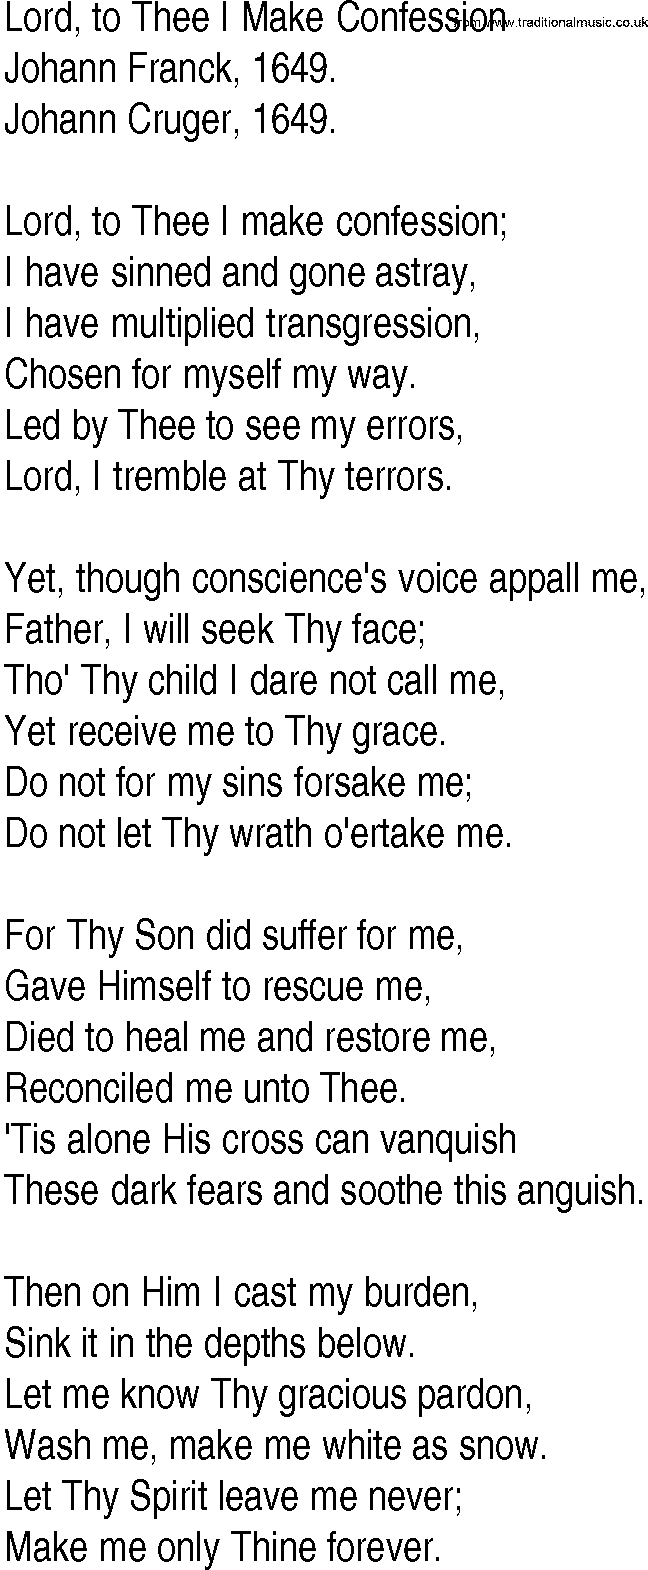 Hymn and Gospel Song: Lord, to Thee I Make Confession by Johann Franck lyrics